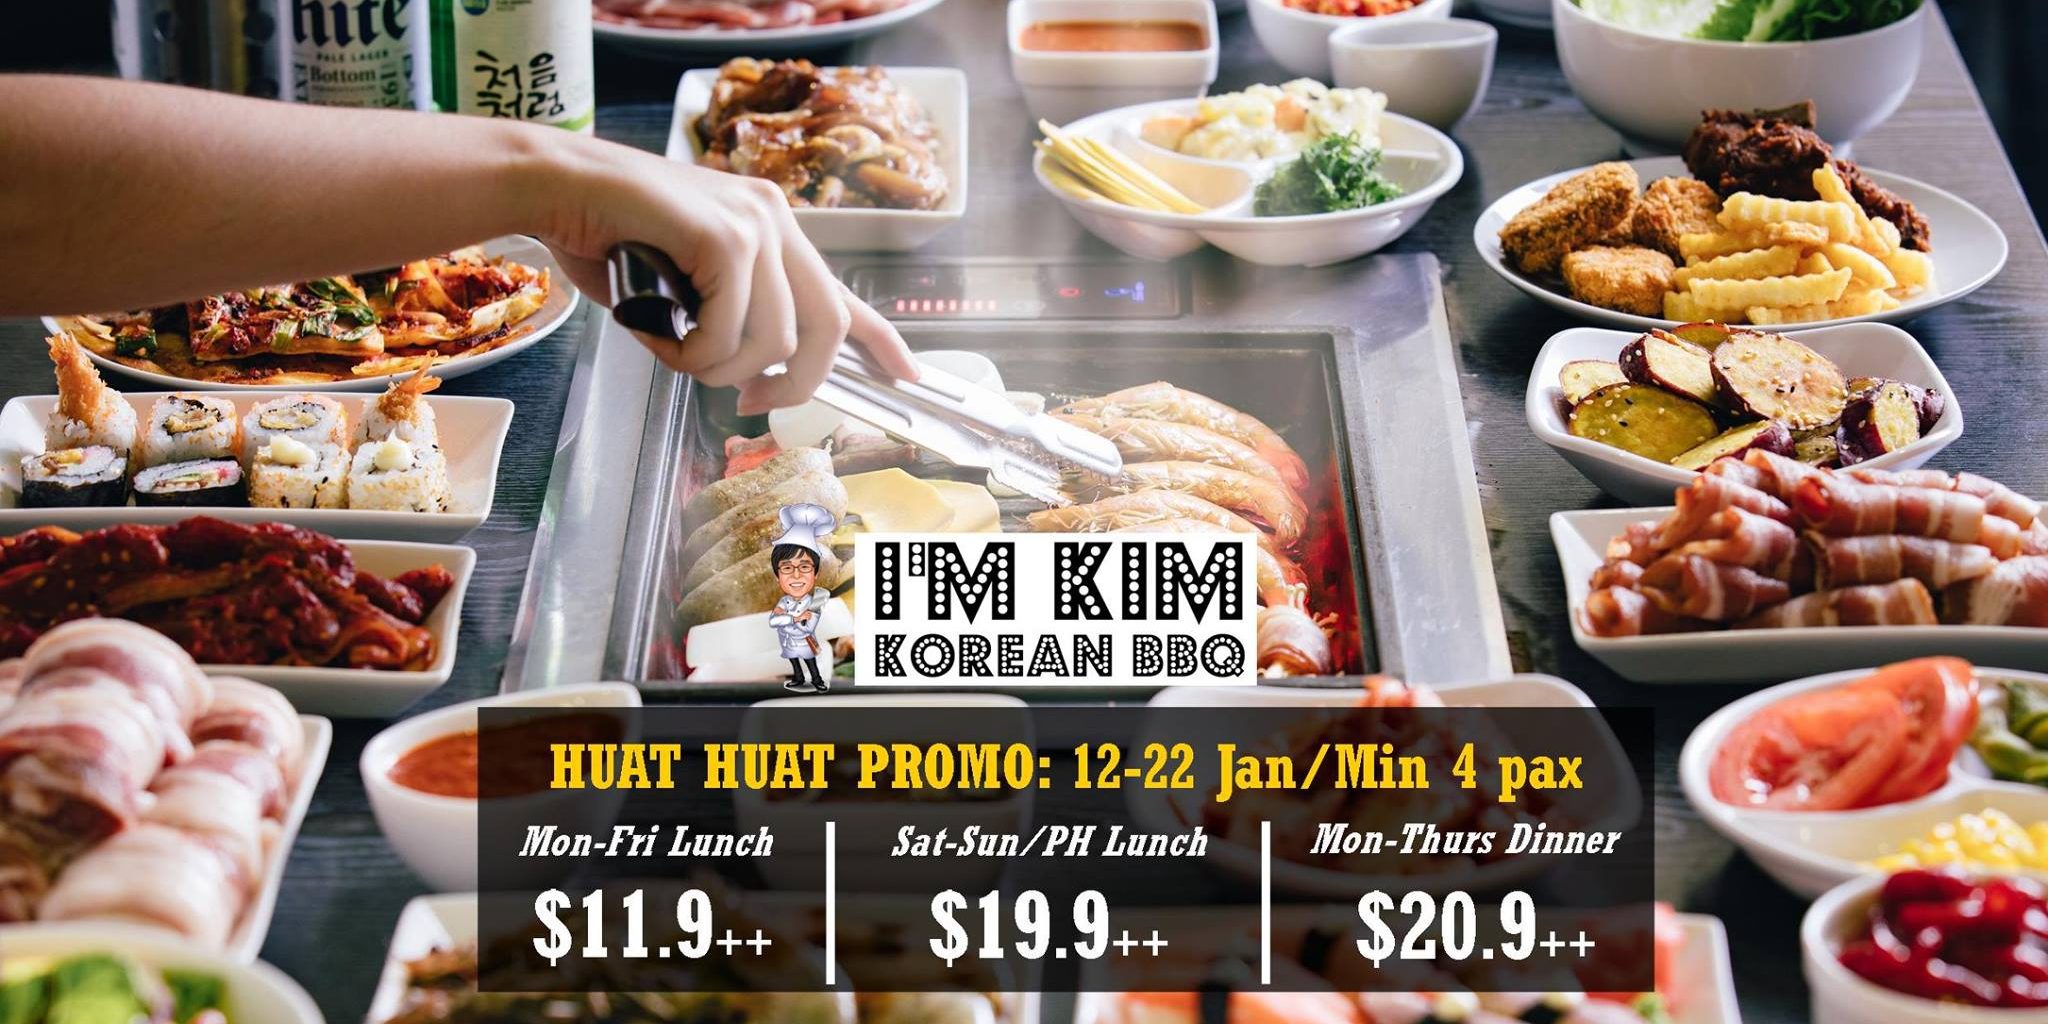 I’m KIM Korean BBQ Singapore Stand to Win Weekend Buffet Lunch Facebook Contest ends 23 Jan 2017